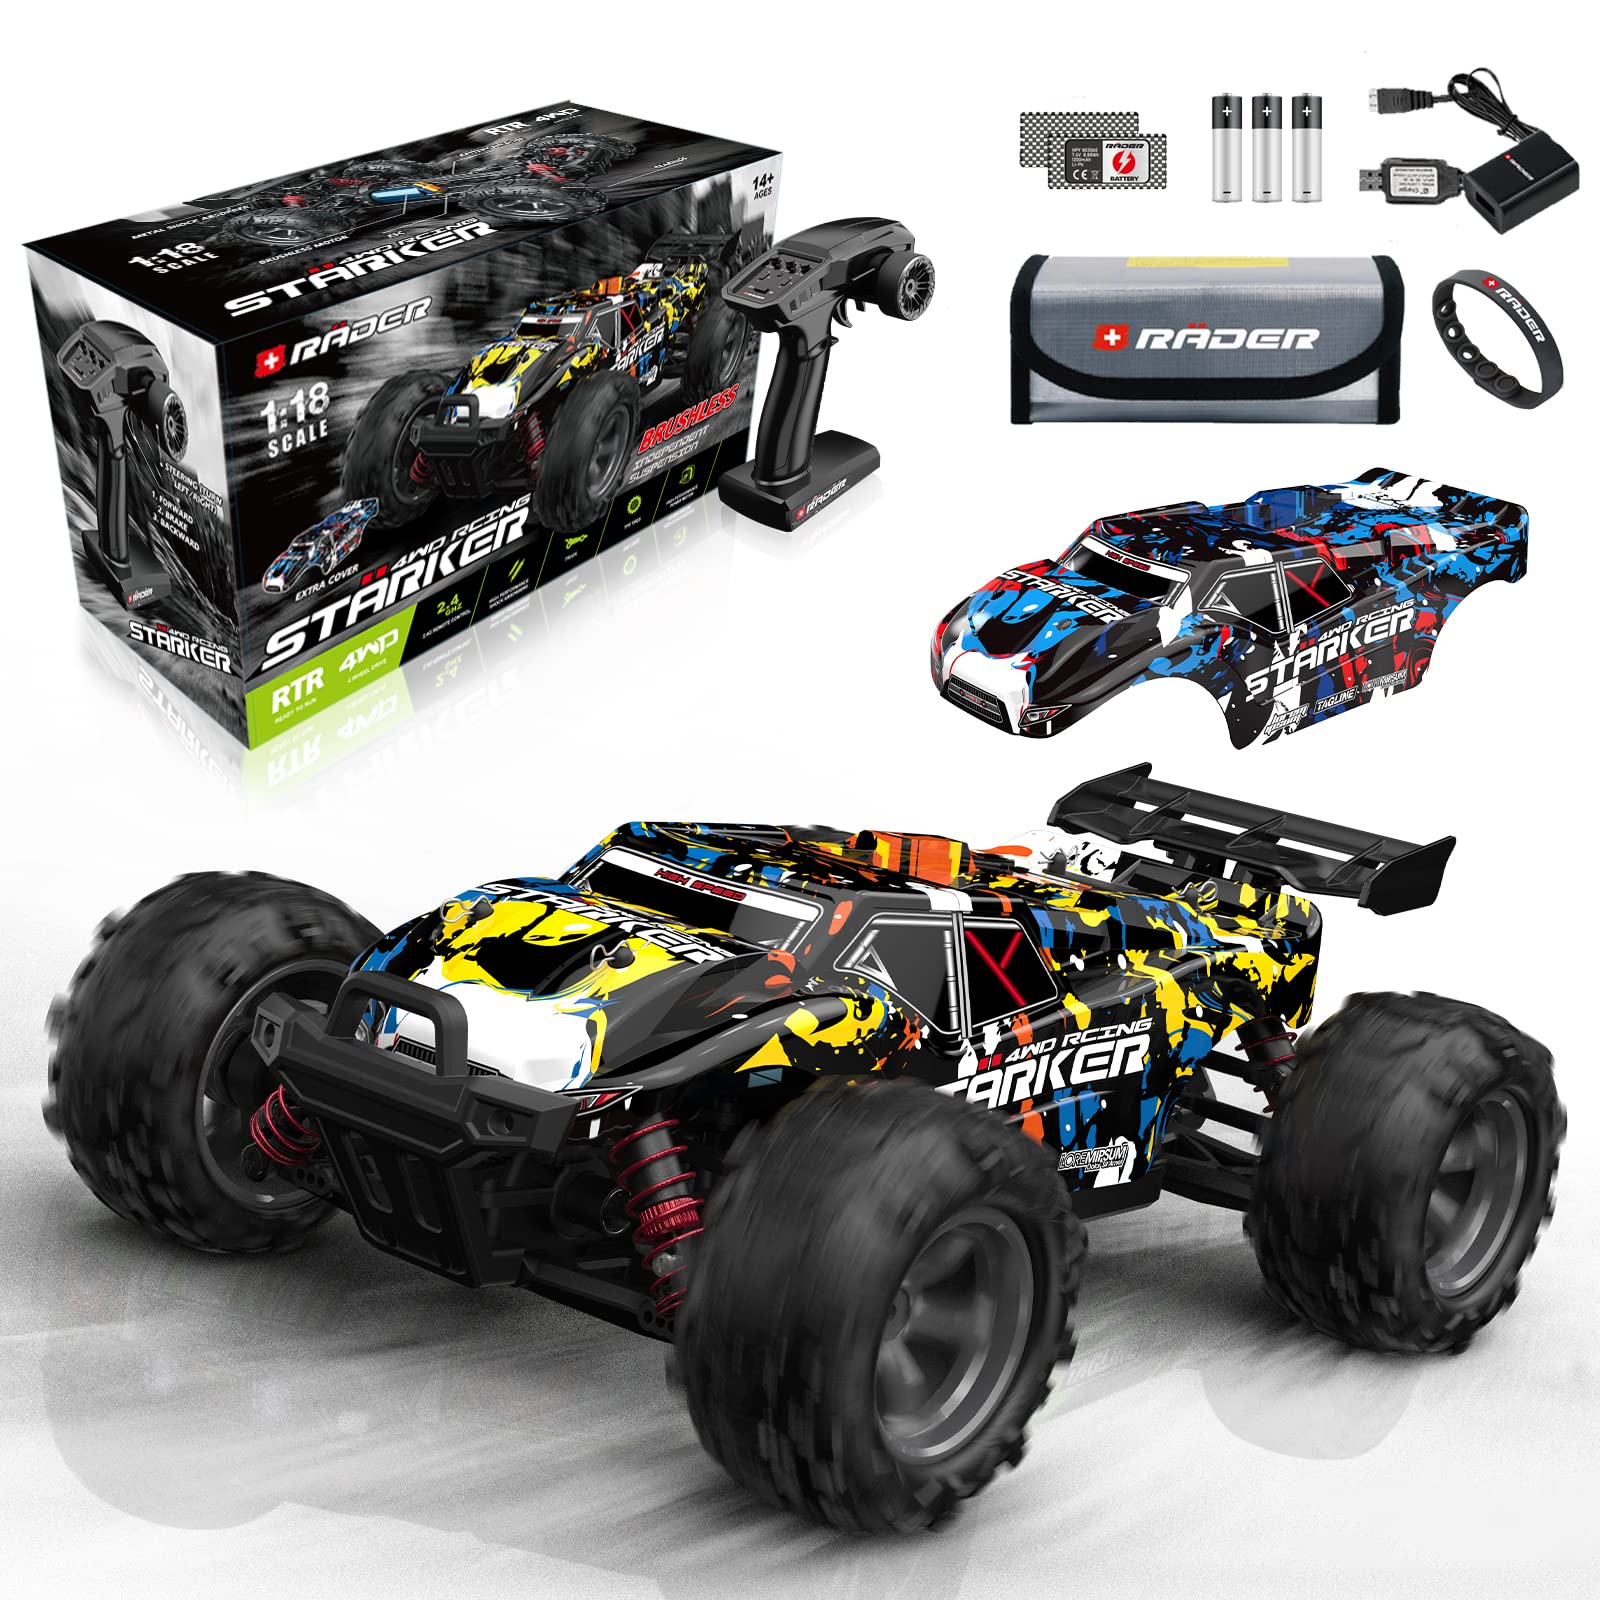 Rader Starker Brushless Rc Cars-1:18 Scale 65+Kmh High Speed Rc Car Hobby Grade Remote Control Car 4X4 Off Road Monster All Terr